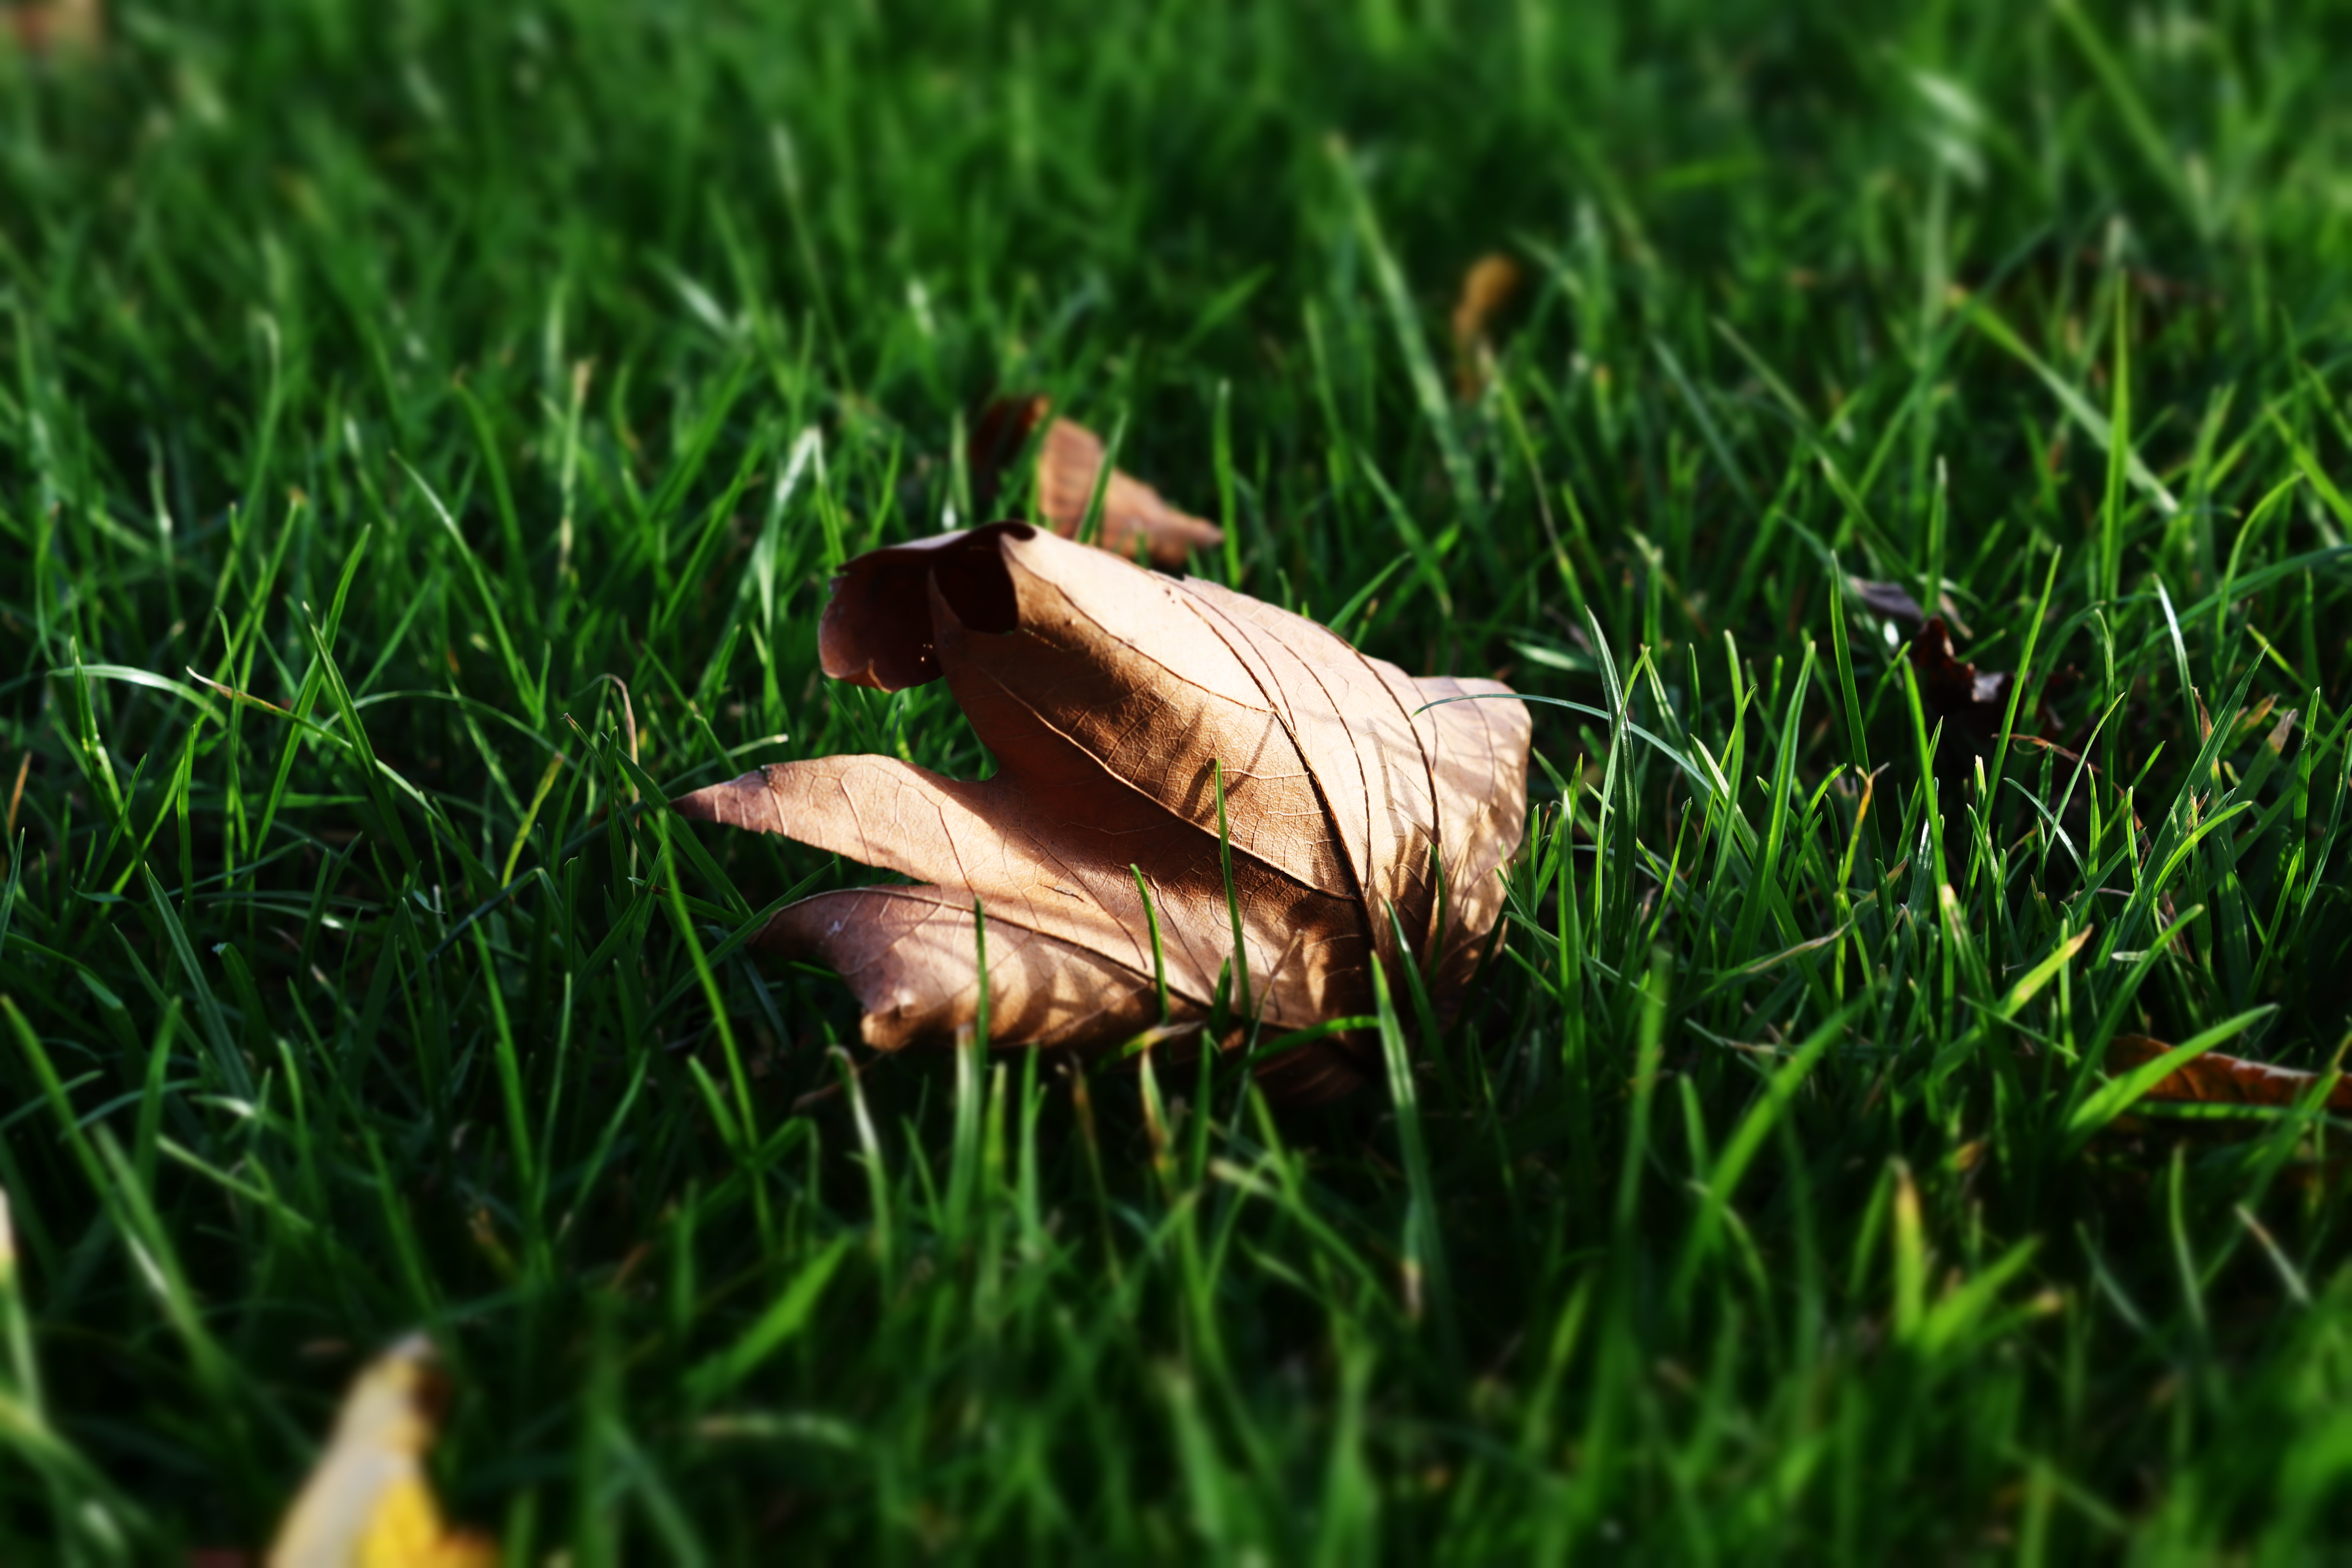 General 6960x4640 fallen leaves grass plants outdoors leaves closeup